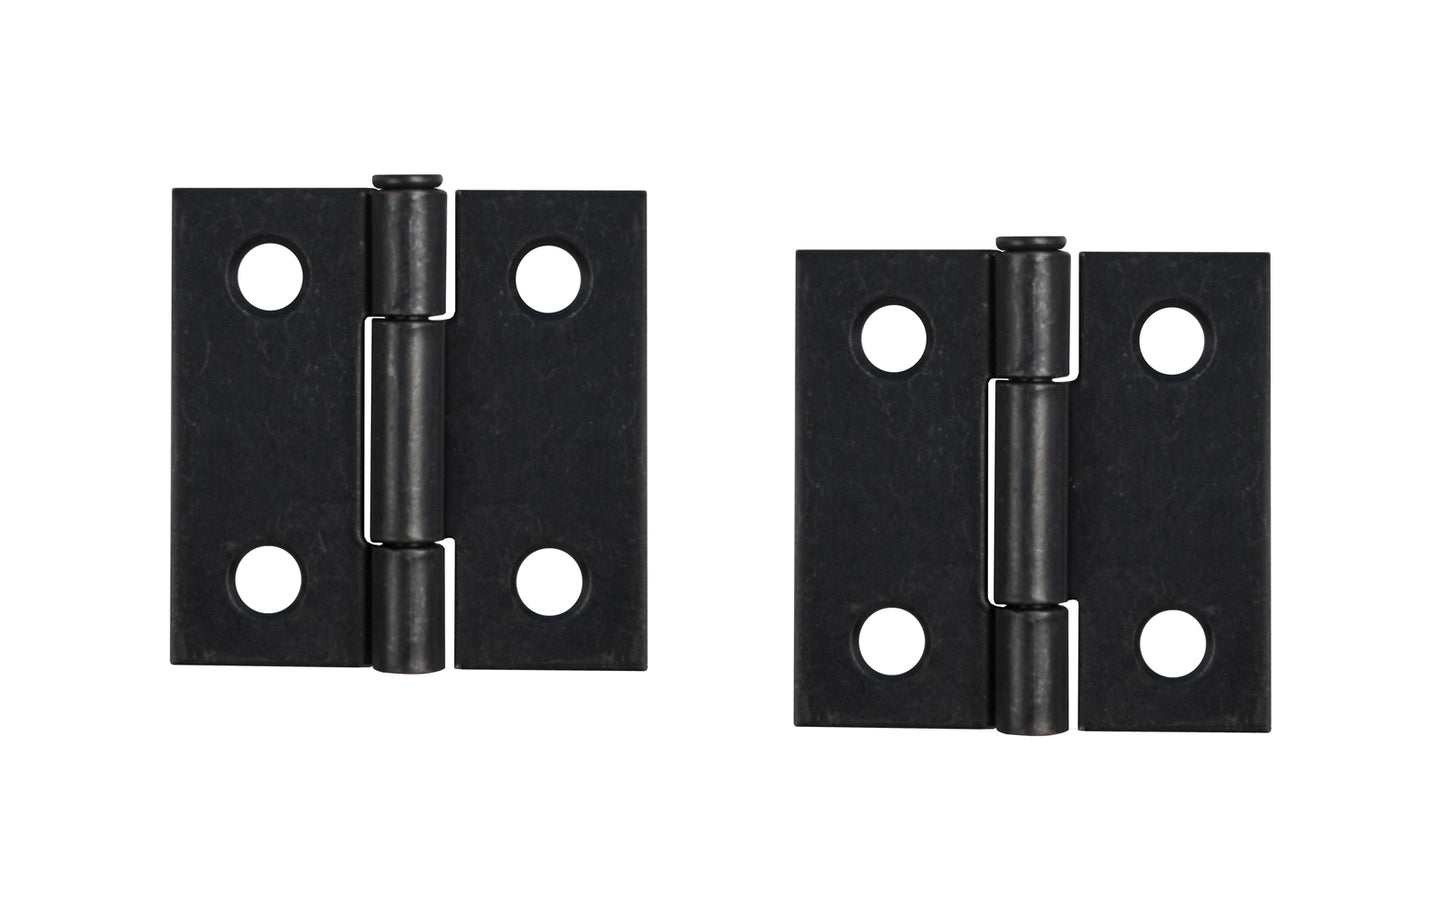 Traditional & classic plated steel butt cabinet hinges with loose pins. Removable hinge pins. 1-1/2" high x 1-1/2" wide. 1/16" leaf thickness gauge. Sold as a pair of hinges. Oil Rubbed Bronze Finish.